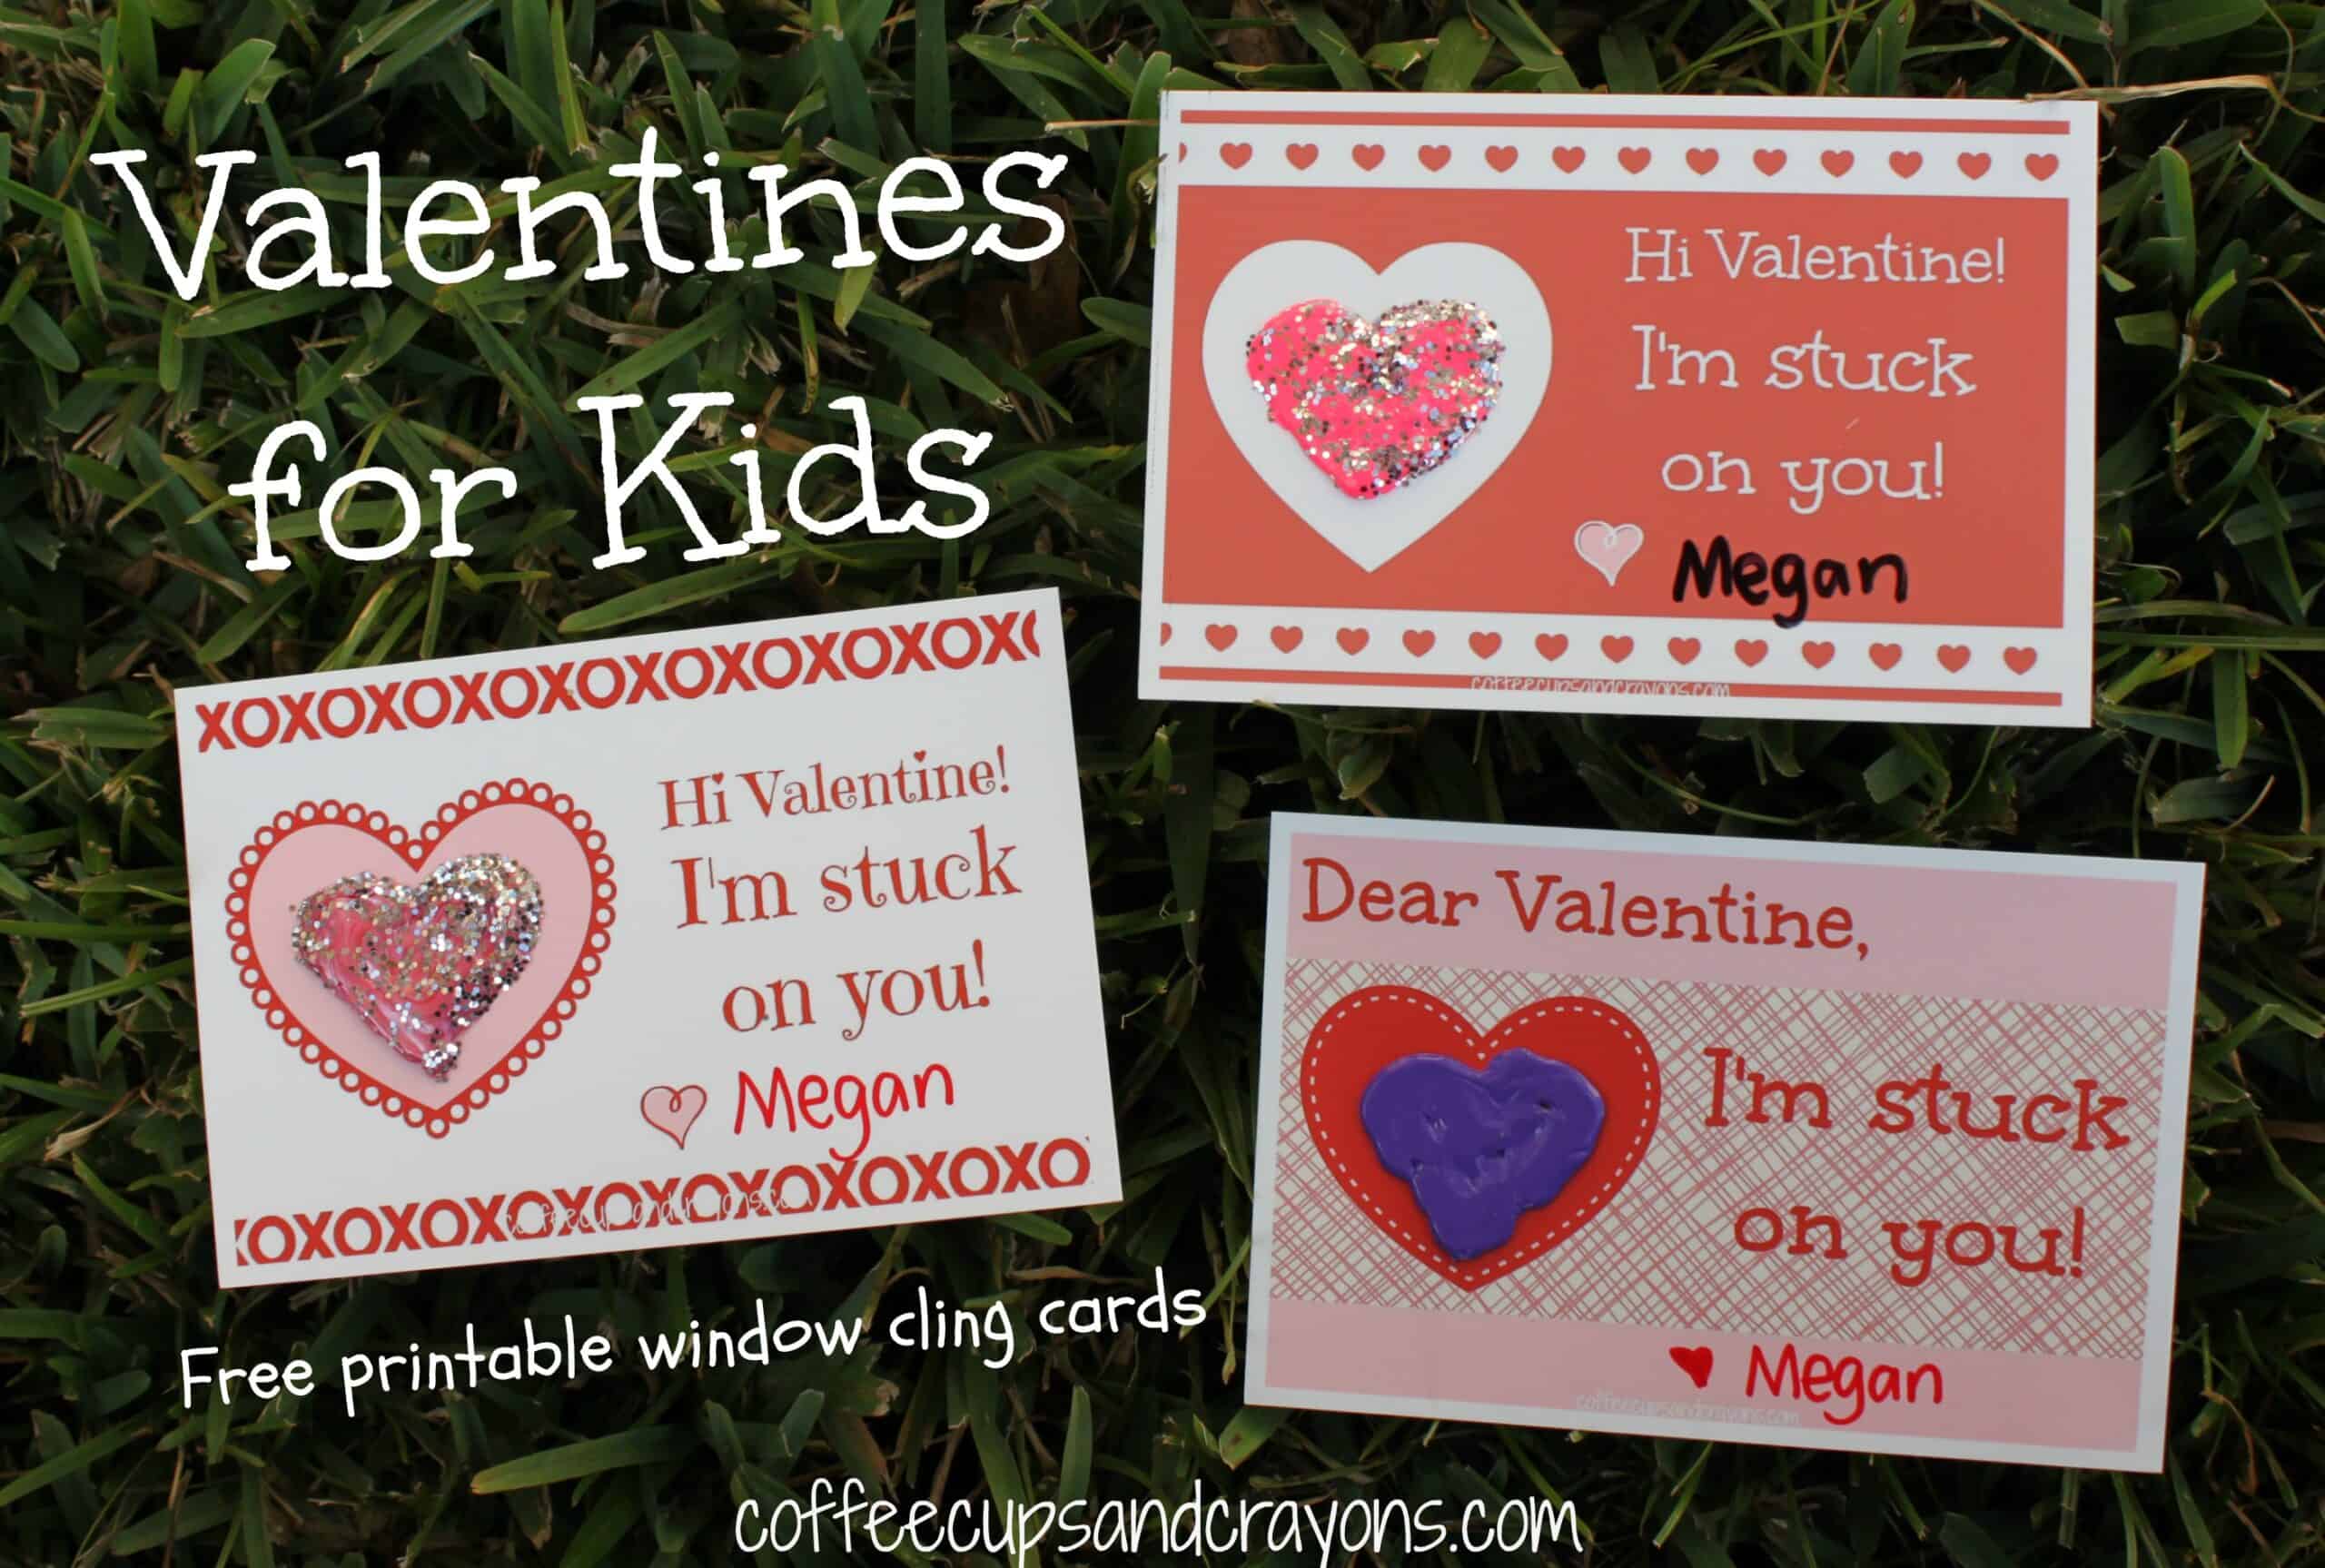 valentines-for-kids-i-m-stuck-on-you-printable-coffee-cups-and-crayons